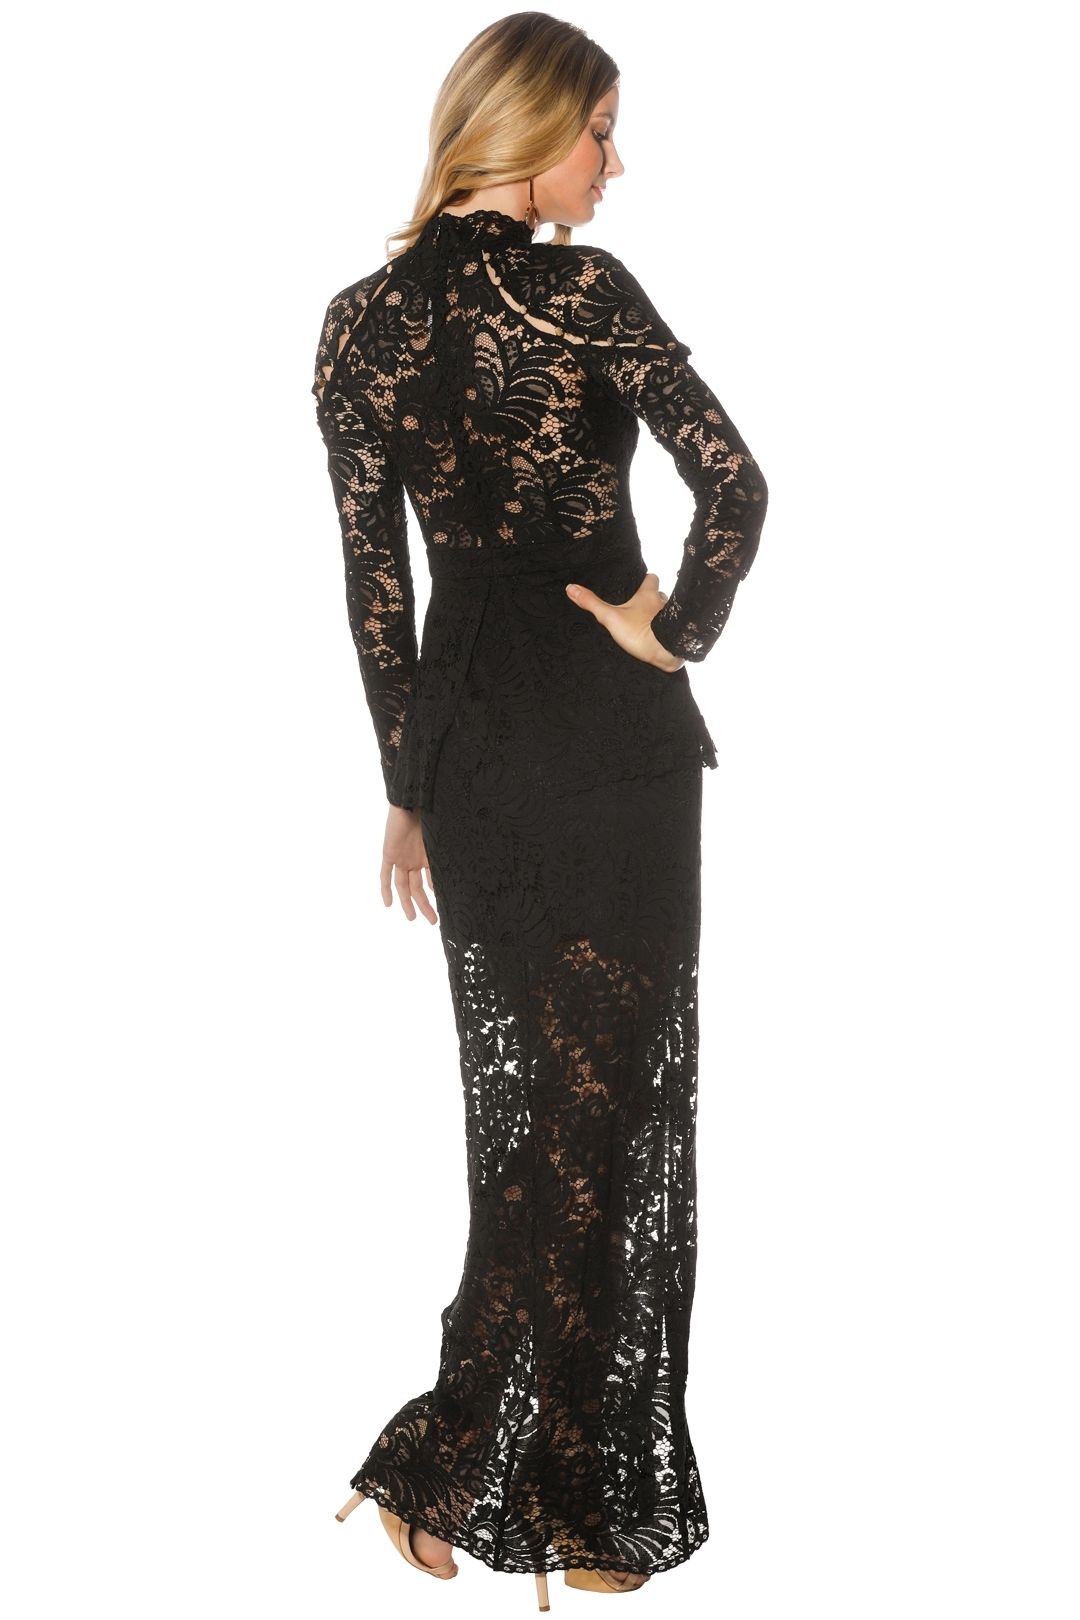 Keepsake The Label - Star Crossed Lace Gown - Black - Back